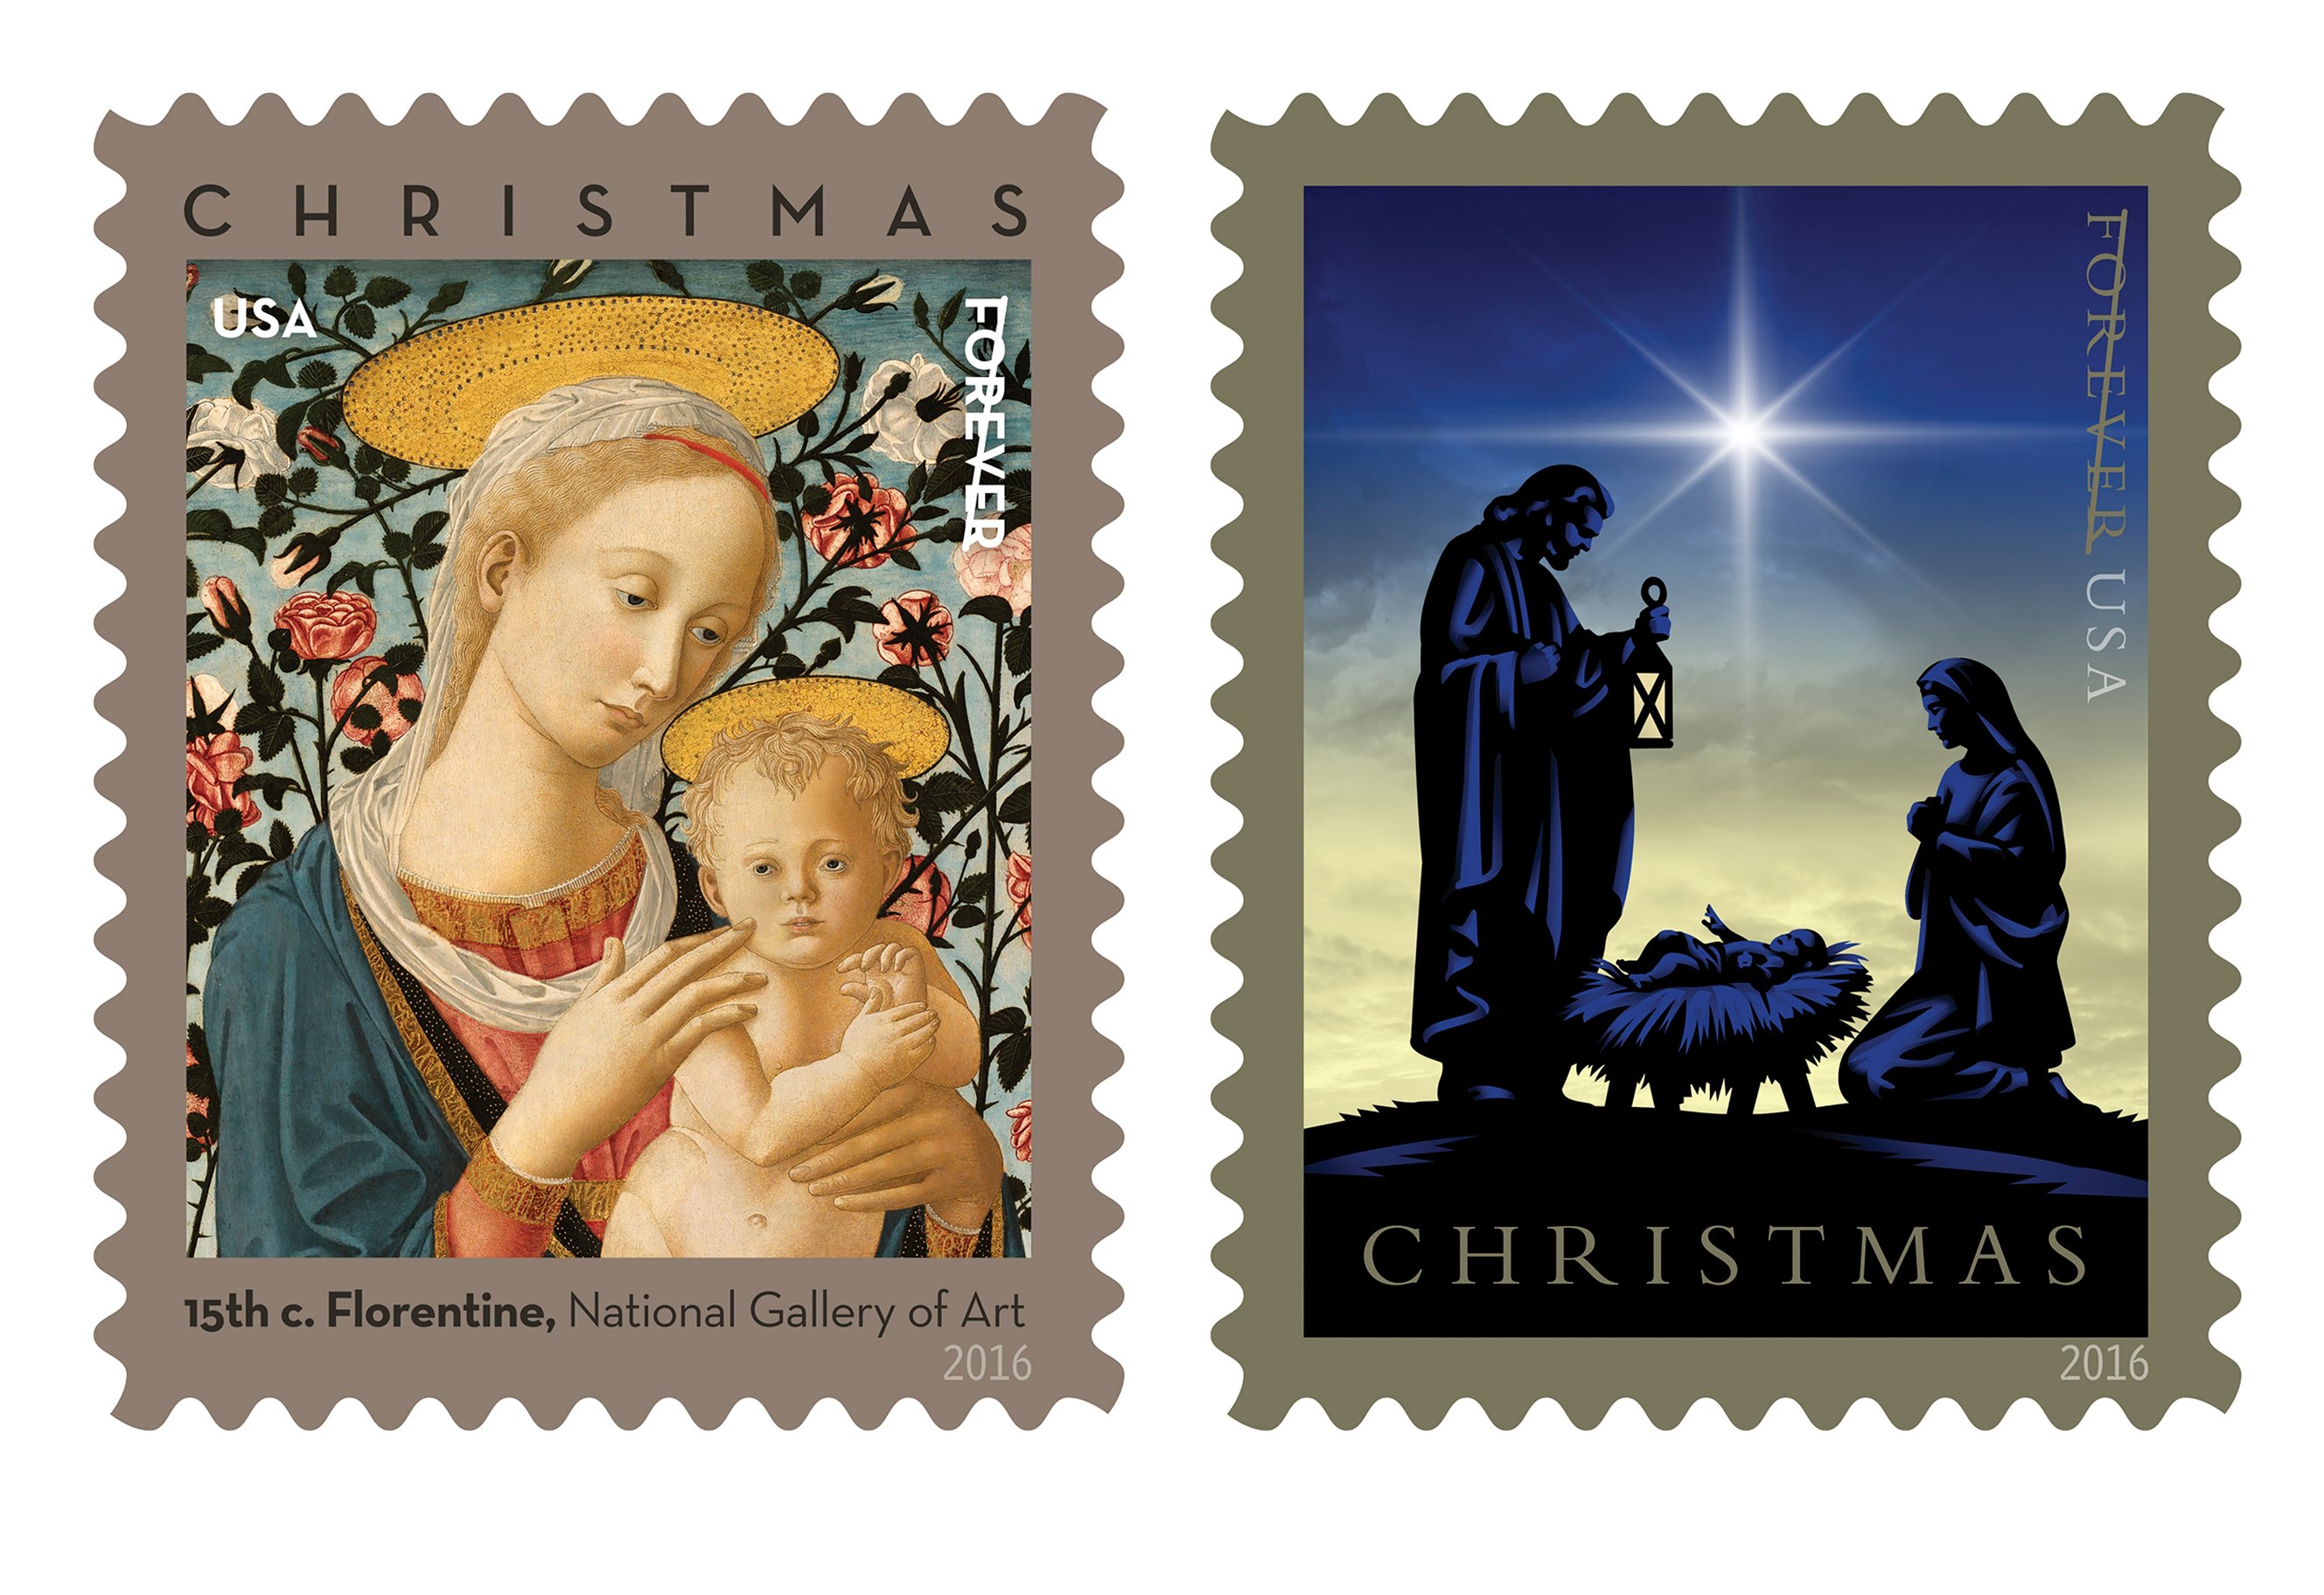 Mary holds the child Jesus in a 15th-century Florentine painting depicted on one of two religiously themed Christmas stamps being issued by the U.S. Postal Service. The image was adapted from a work by an anonymous follower of artists Fra Filippo Lippi and Pesellino. The original painting is in the collection of the National Gallery of Art in Washington. The stamp was to be available at post offices Oct. 18. A second stamp depicting the Nativity in silhouette against the dawn sky was planned for release Nov. 3. (CNS photo/U.S. Postal Service)